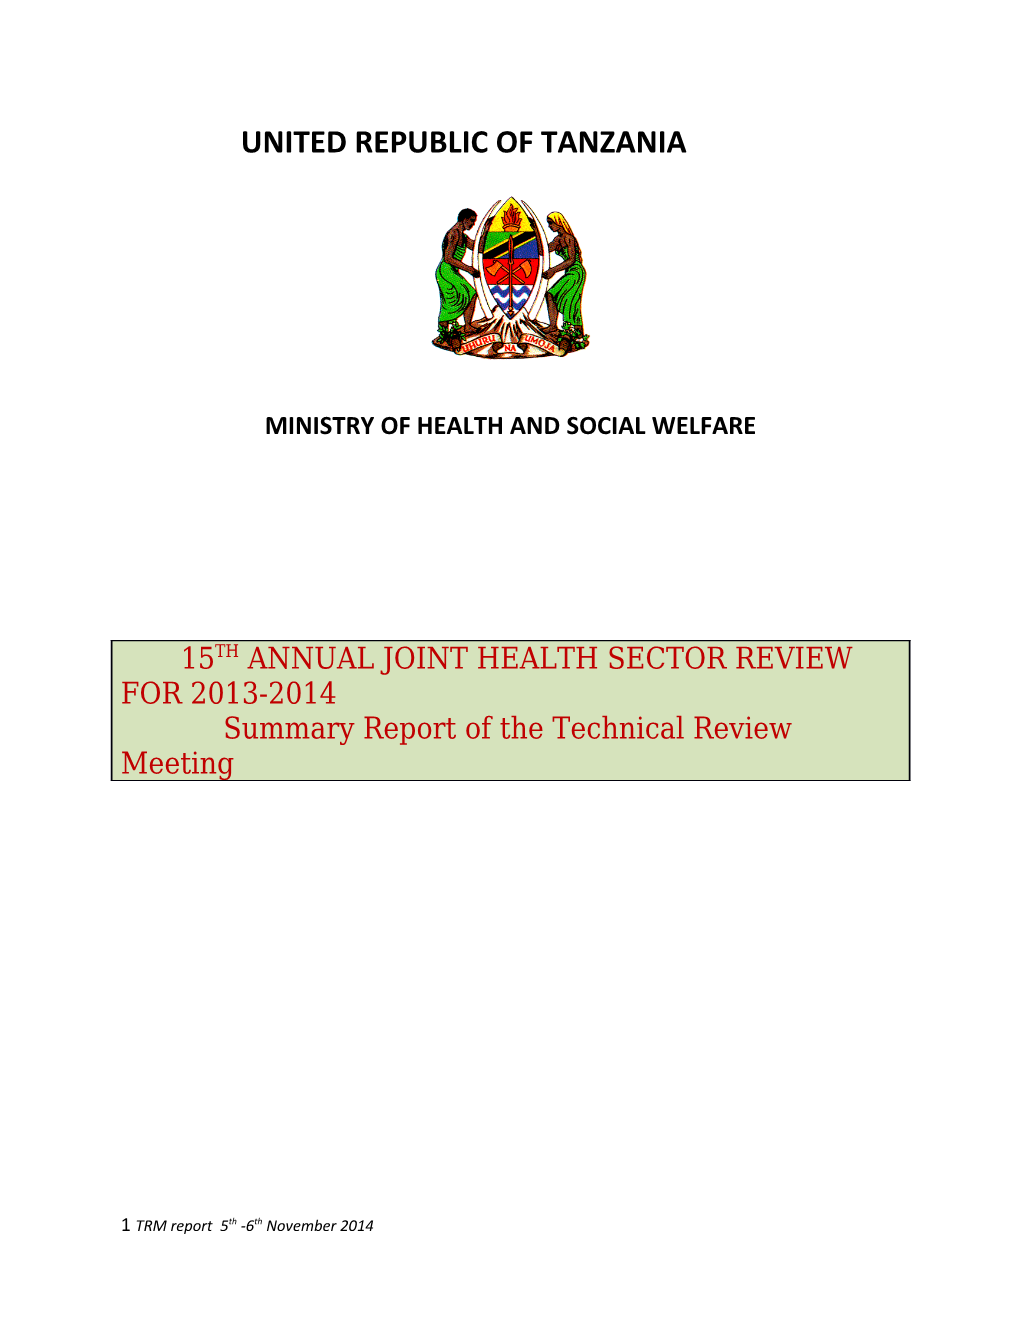 Ministry of Health and Social Welfare